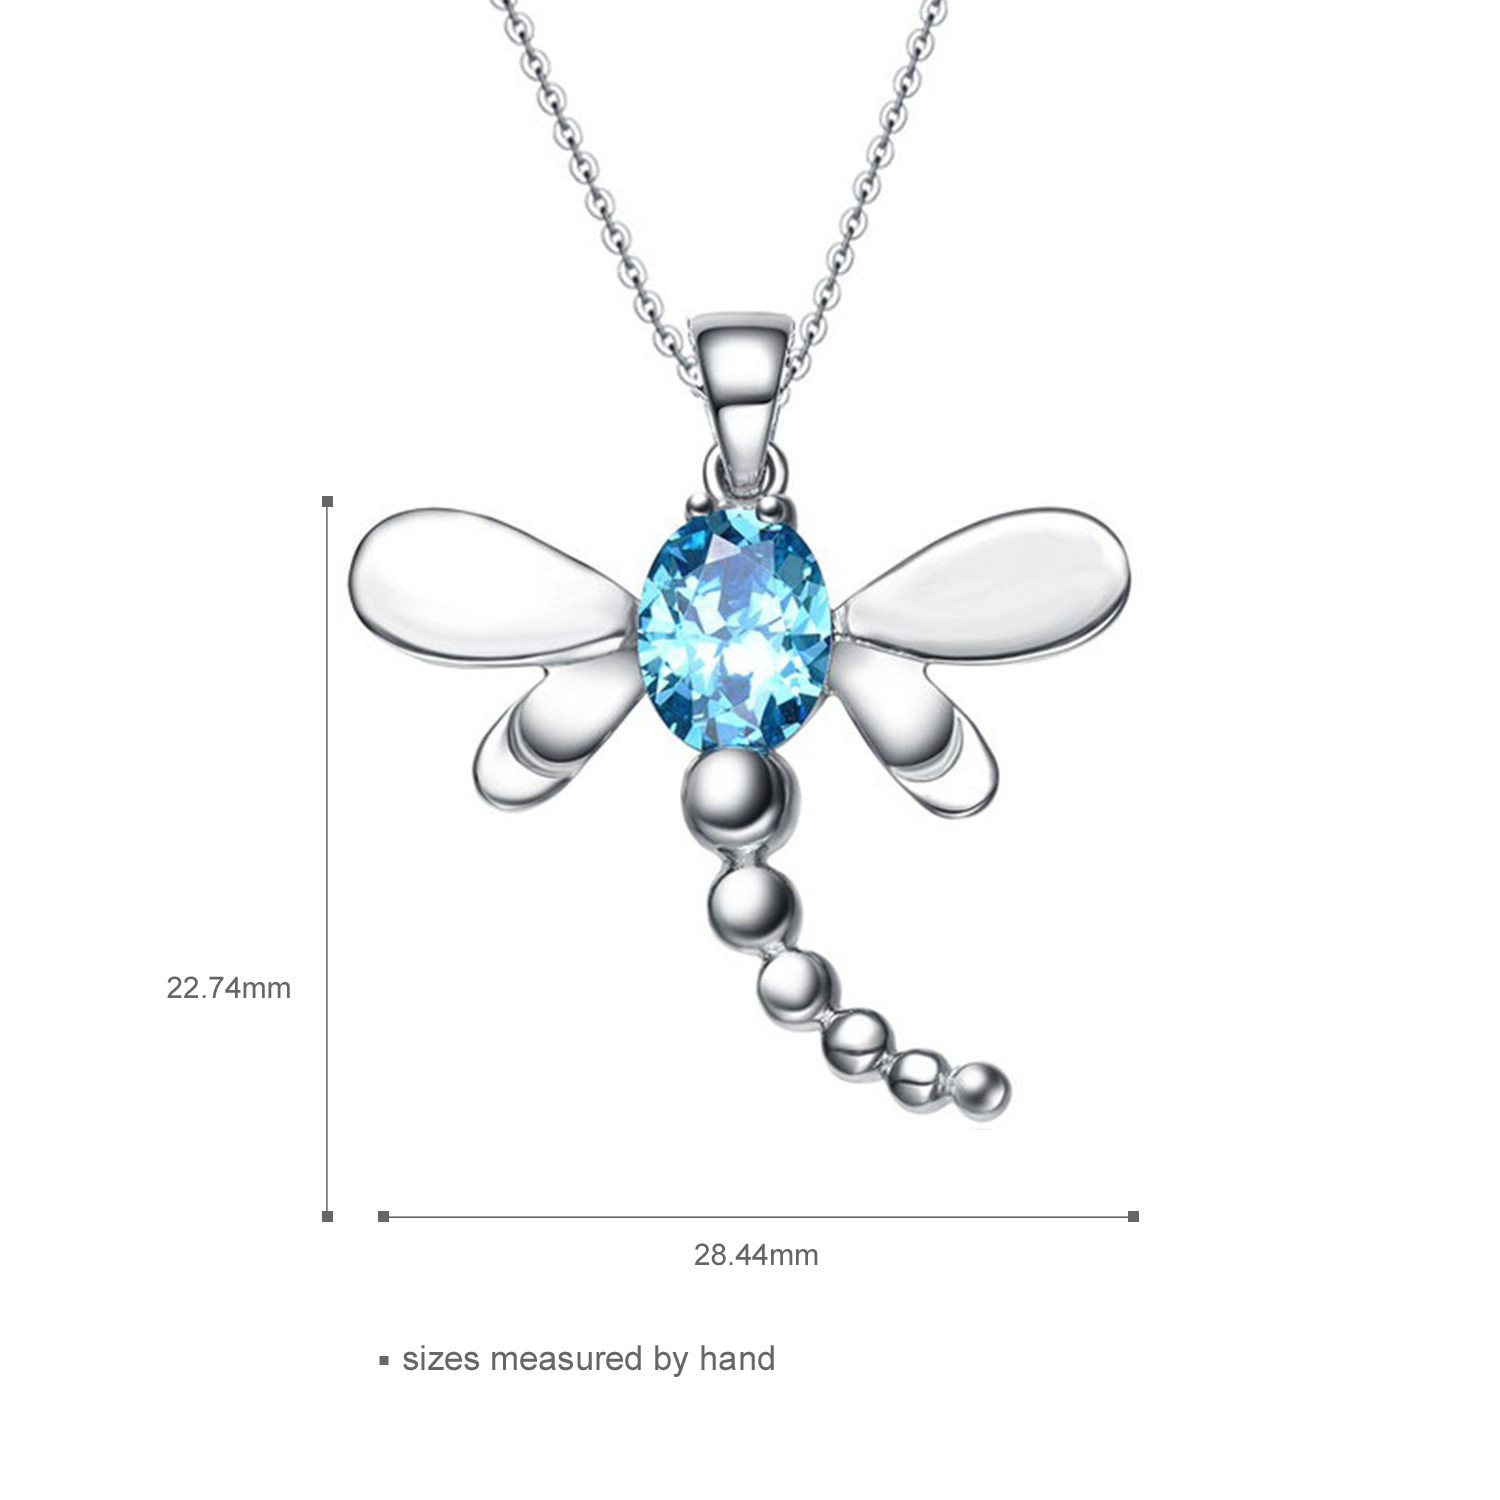 Wholesale Jewelry Necklace Women 925 Sterling Silver Cubic Zircon Dragonfly Cute Pendant Necklace(图4)